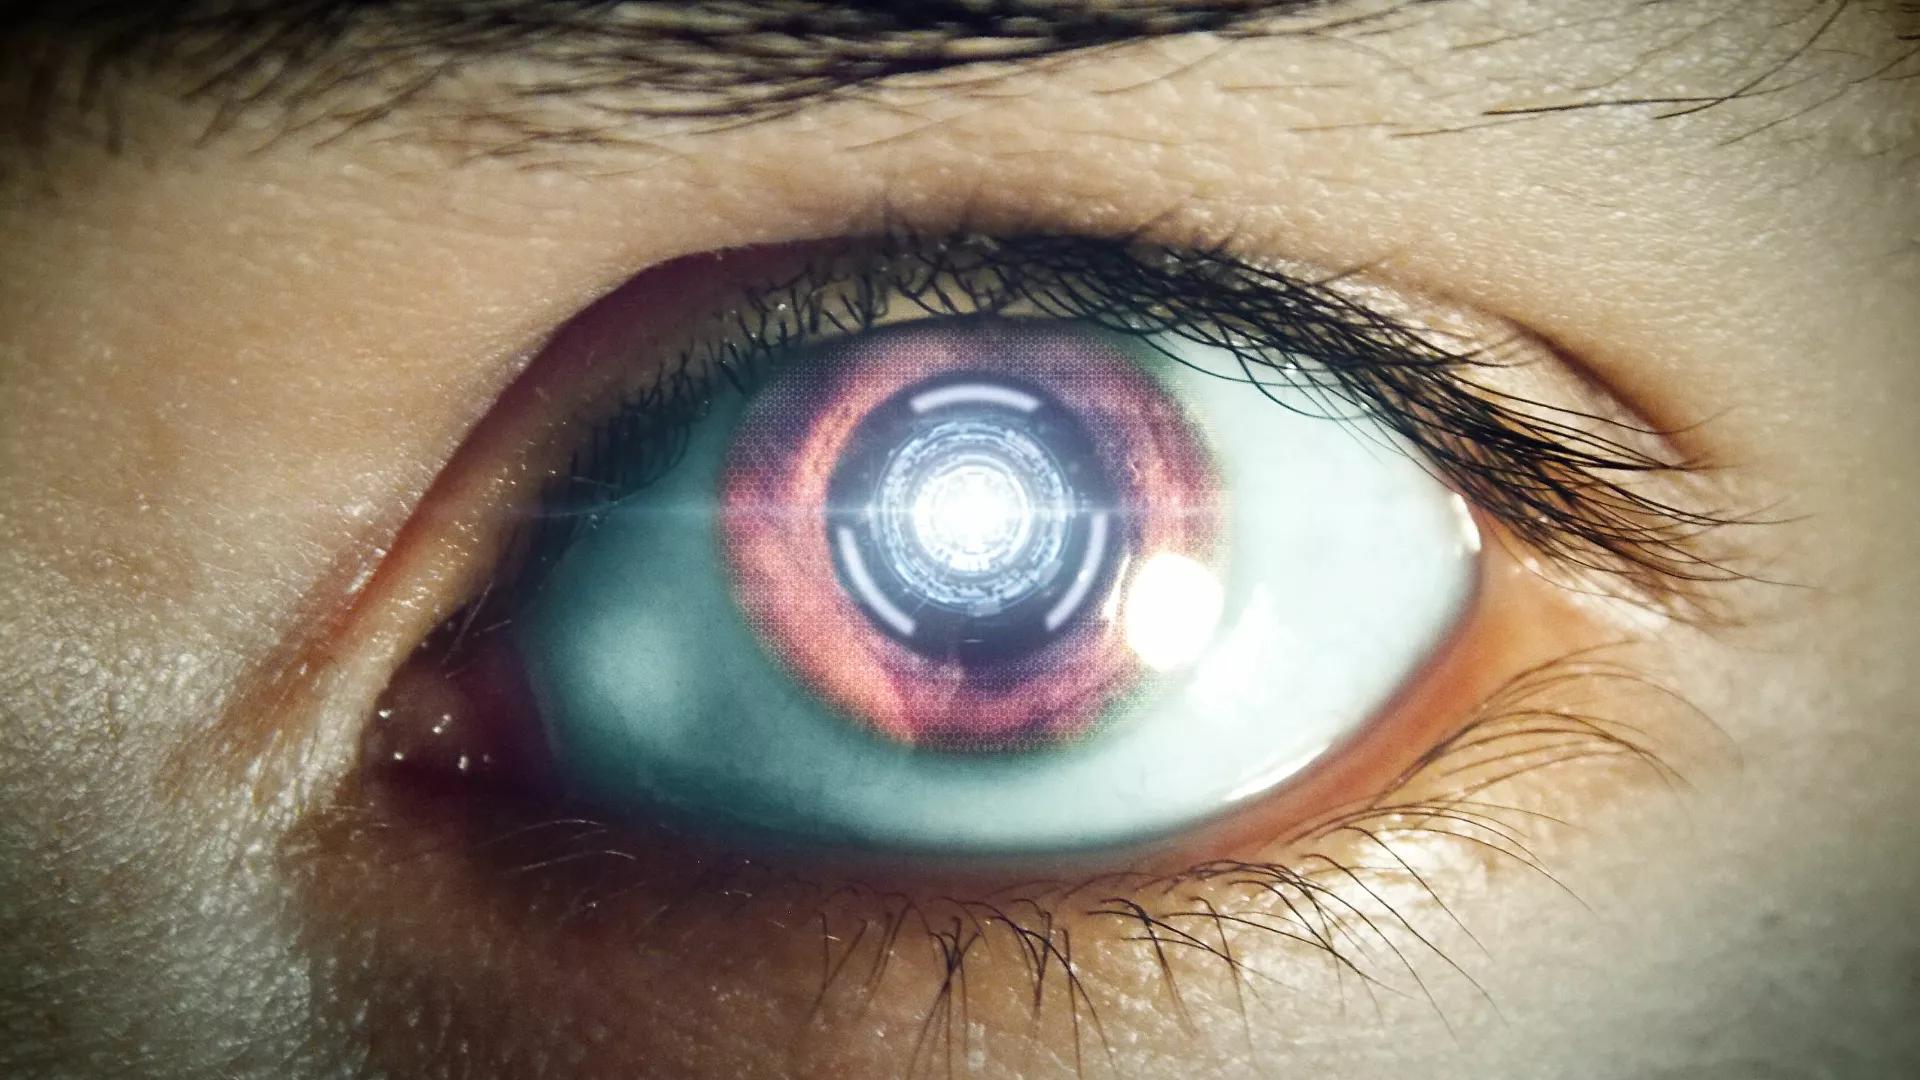 Eye Spy When You May Die: Scientists Try Using Retina Scan to Predict Risk of Death